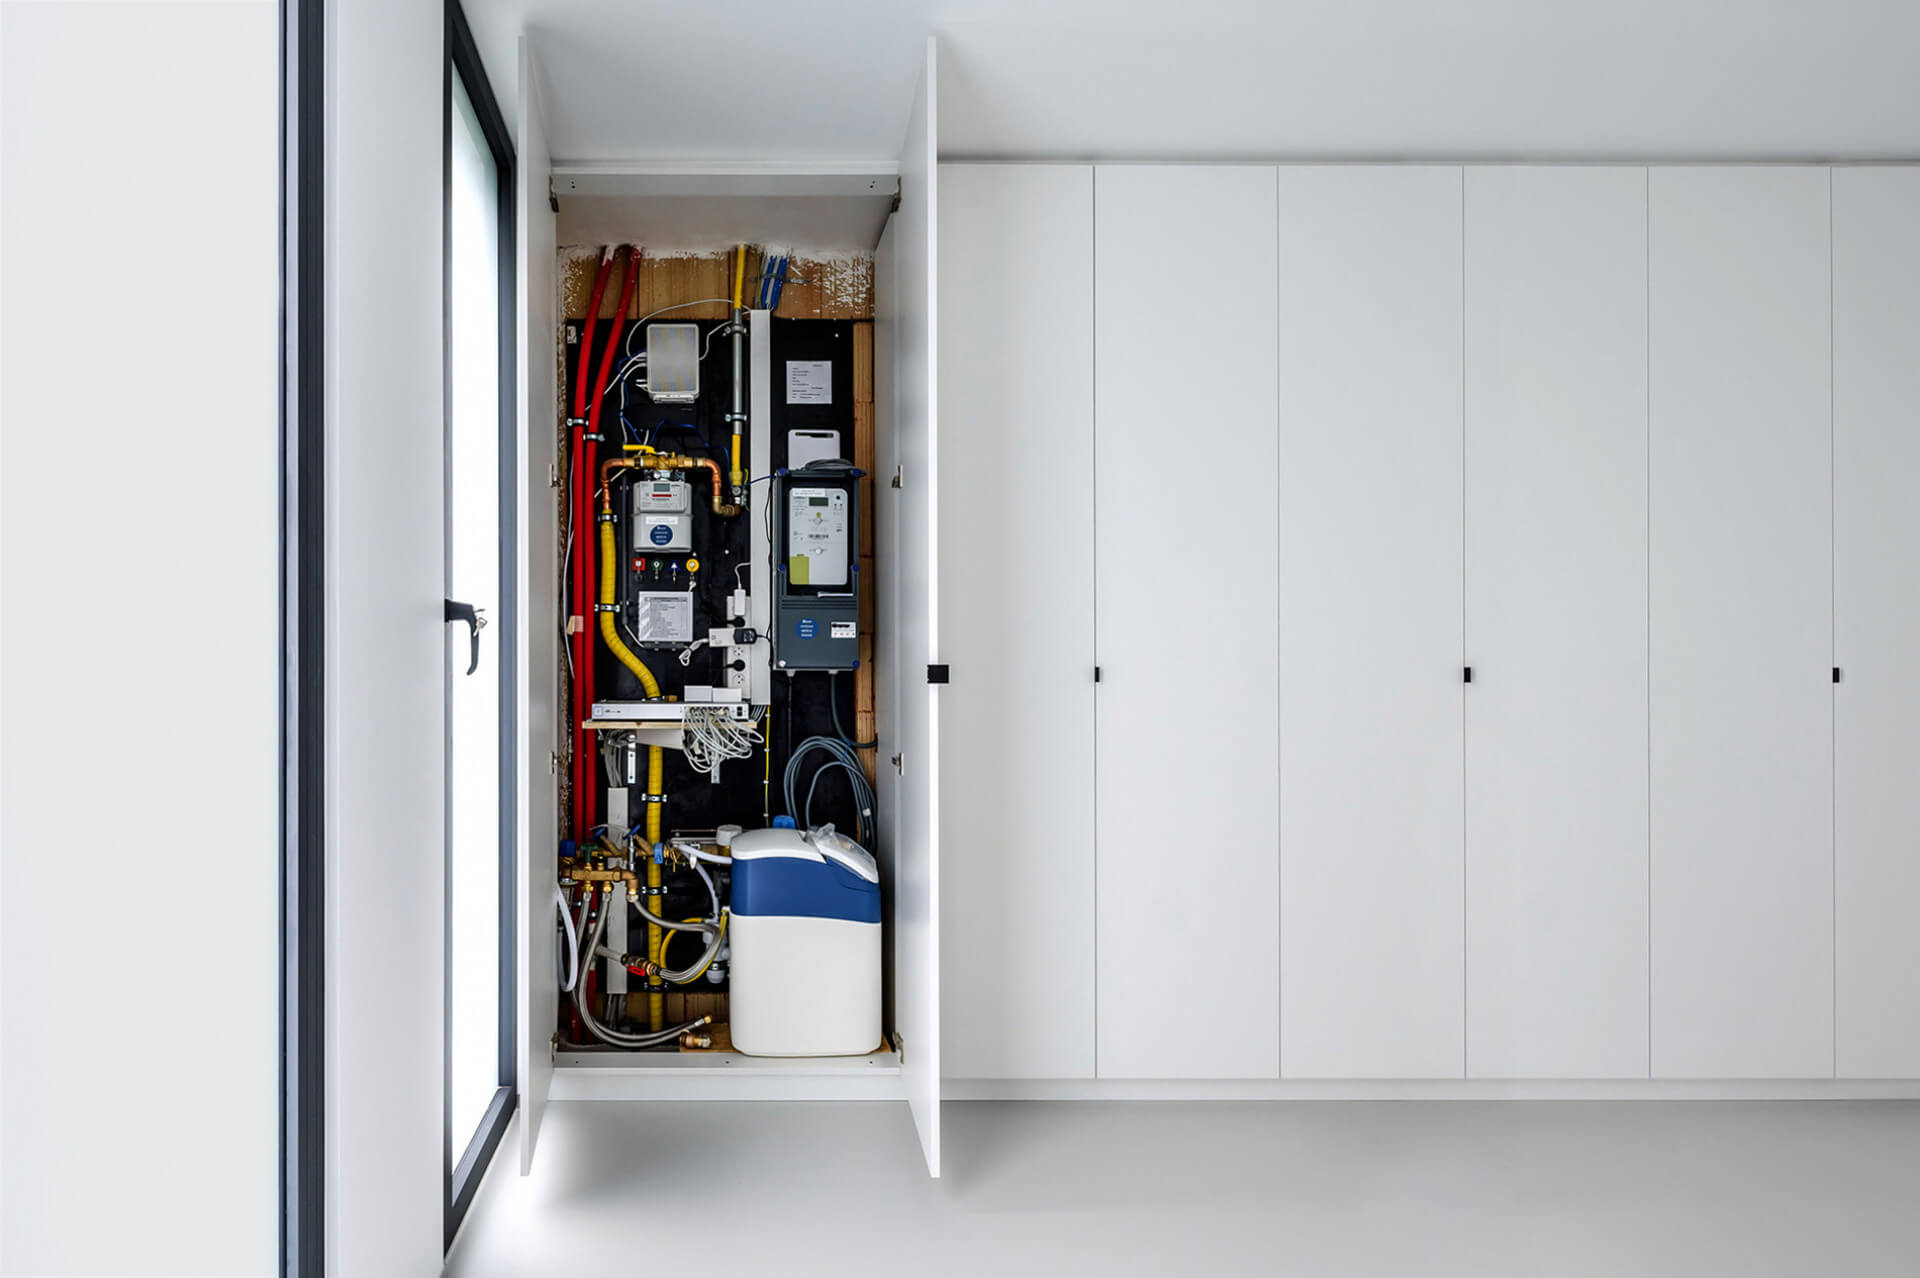 Transporting technical installations with a custom-made cabinet